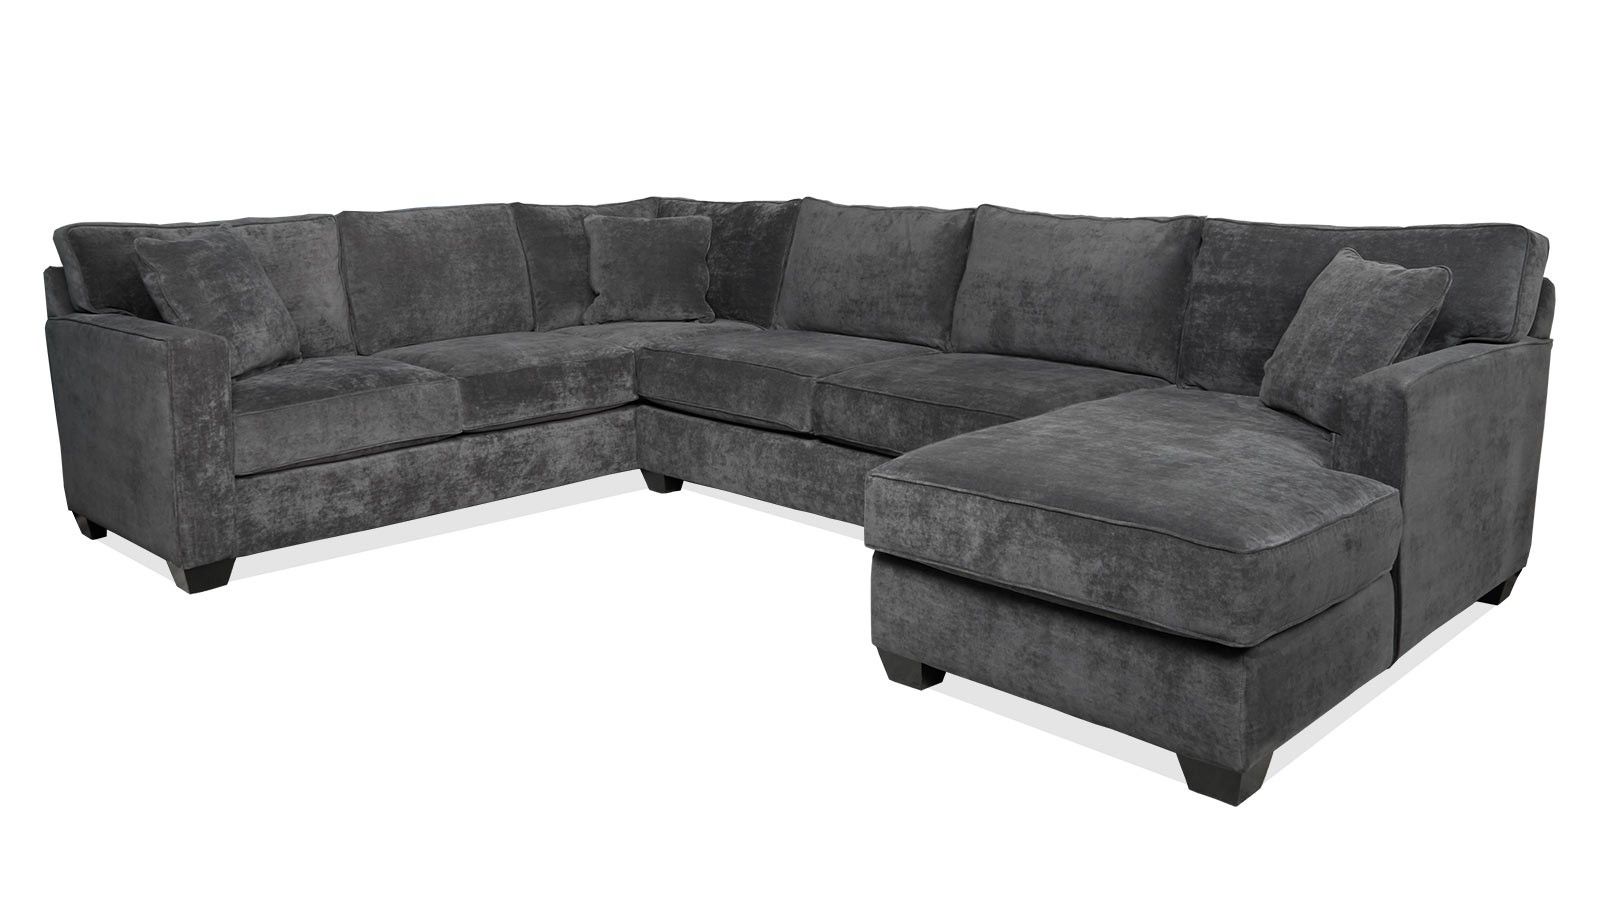 New Berlin Raf Sectional | Gallery Furniture In Gallery Furniture Sectional Sofas (Photo 1 of 10)